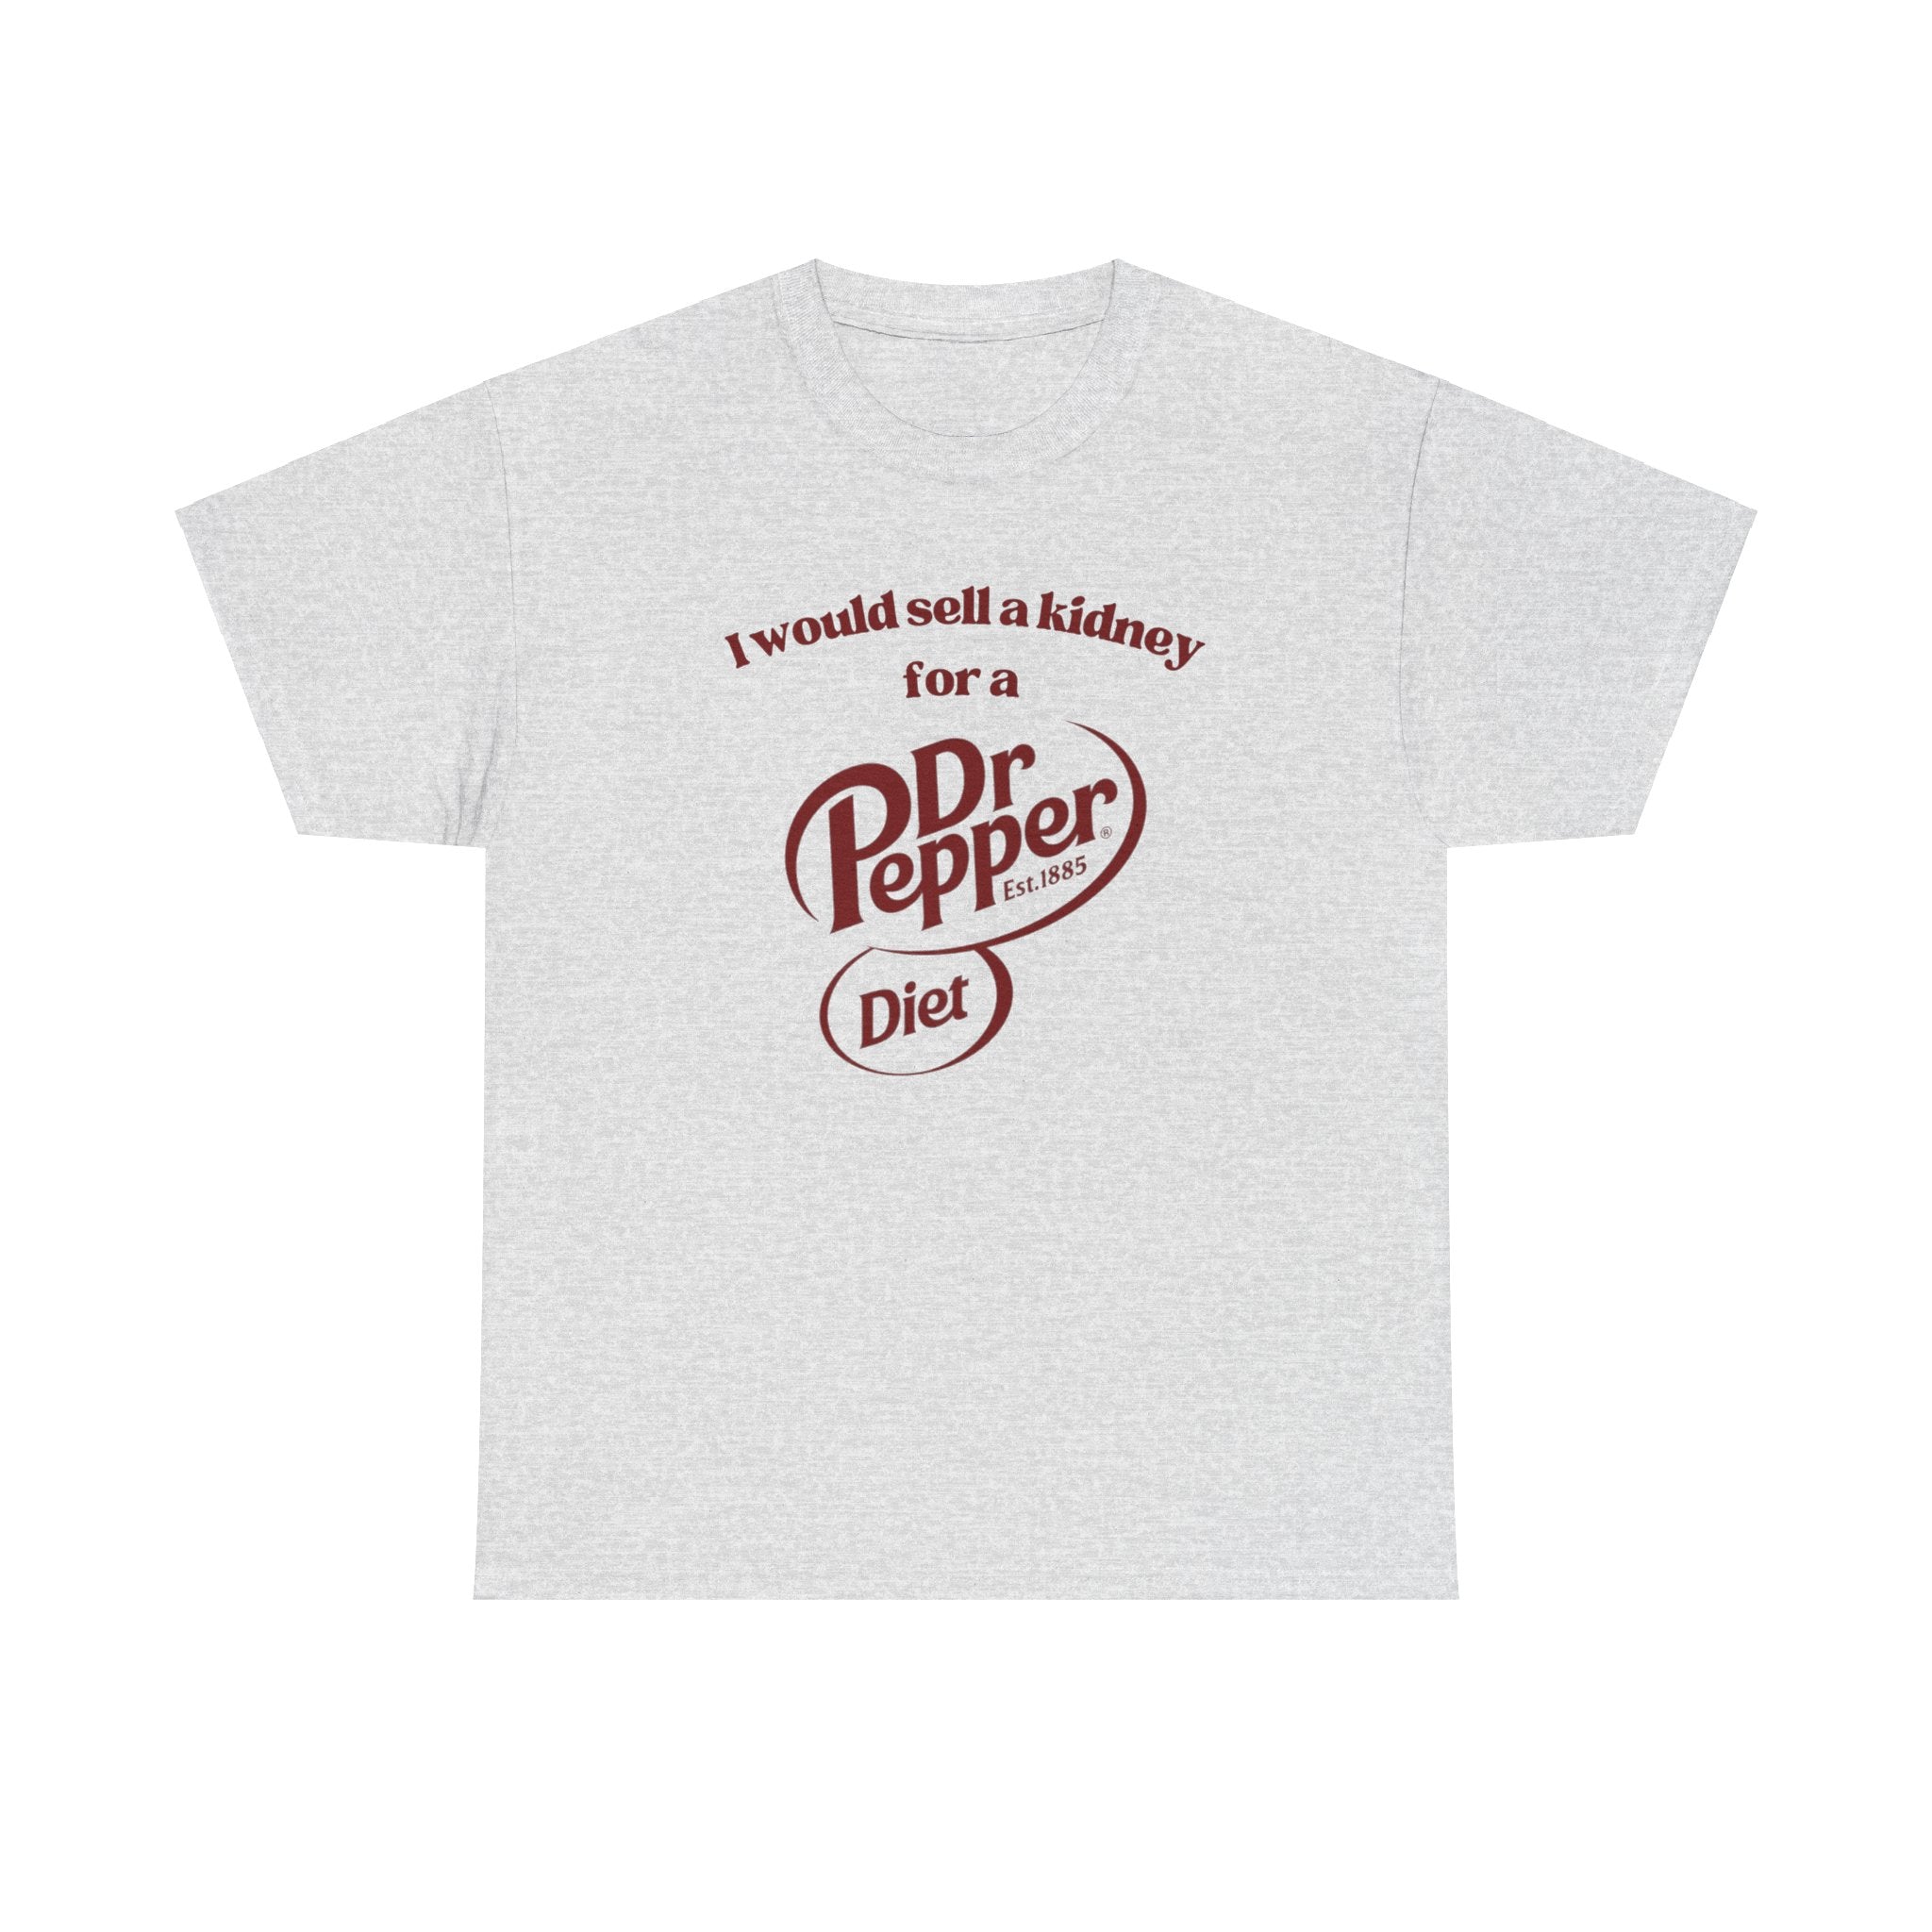 I Would Sell a Kidney for a Diet Dr. Pepper Shirt